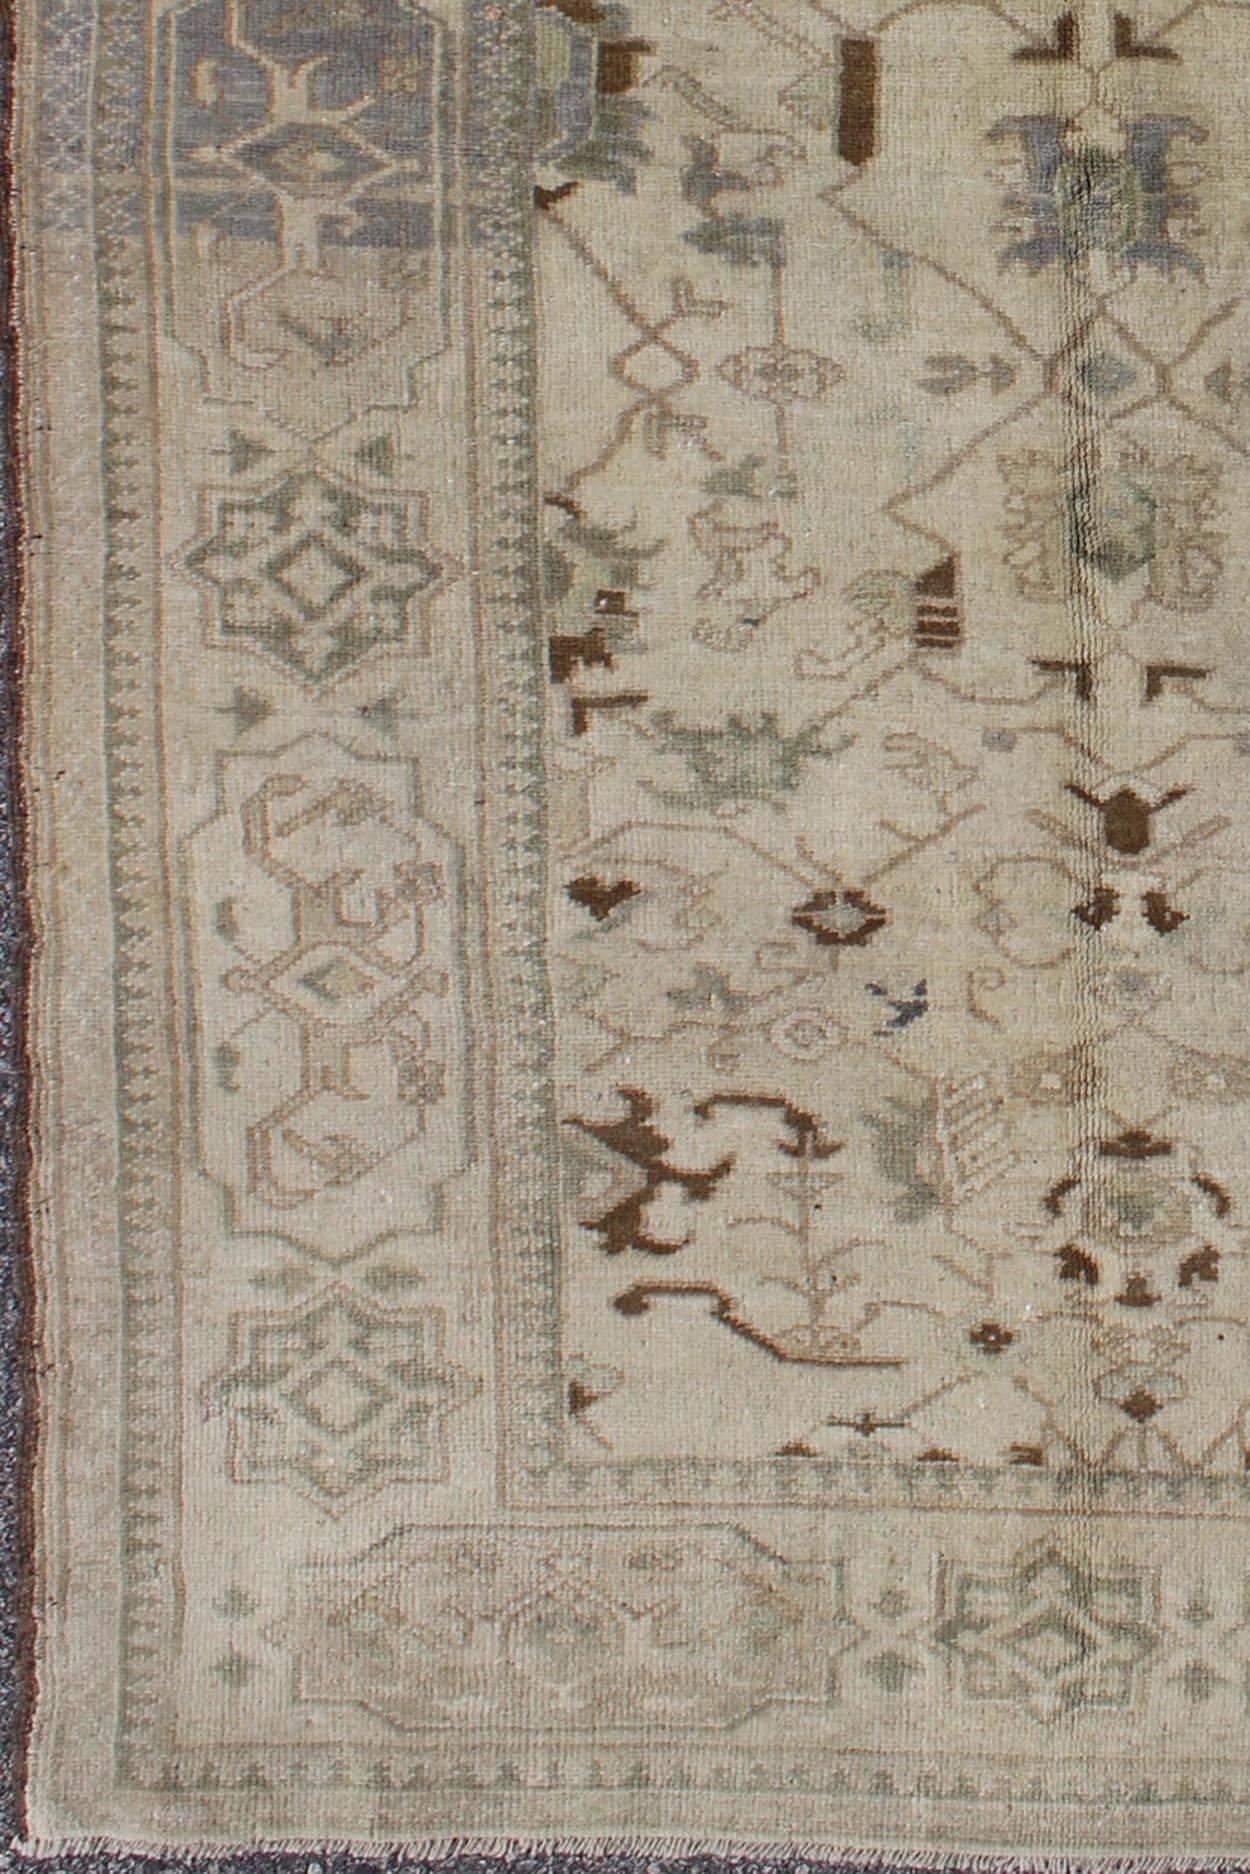 This vintage Turkish Oushak carpet (circa mid-20th century) features an all-over design of sub-geometric and tribal motifs. The rug's qualities are enhanced by its particularly soft and lustrous wool. Colors include ivory, gray, and brown, with